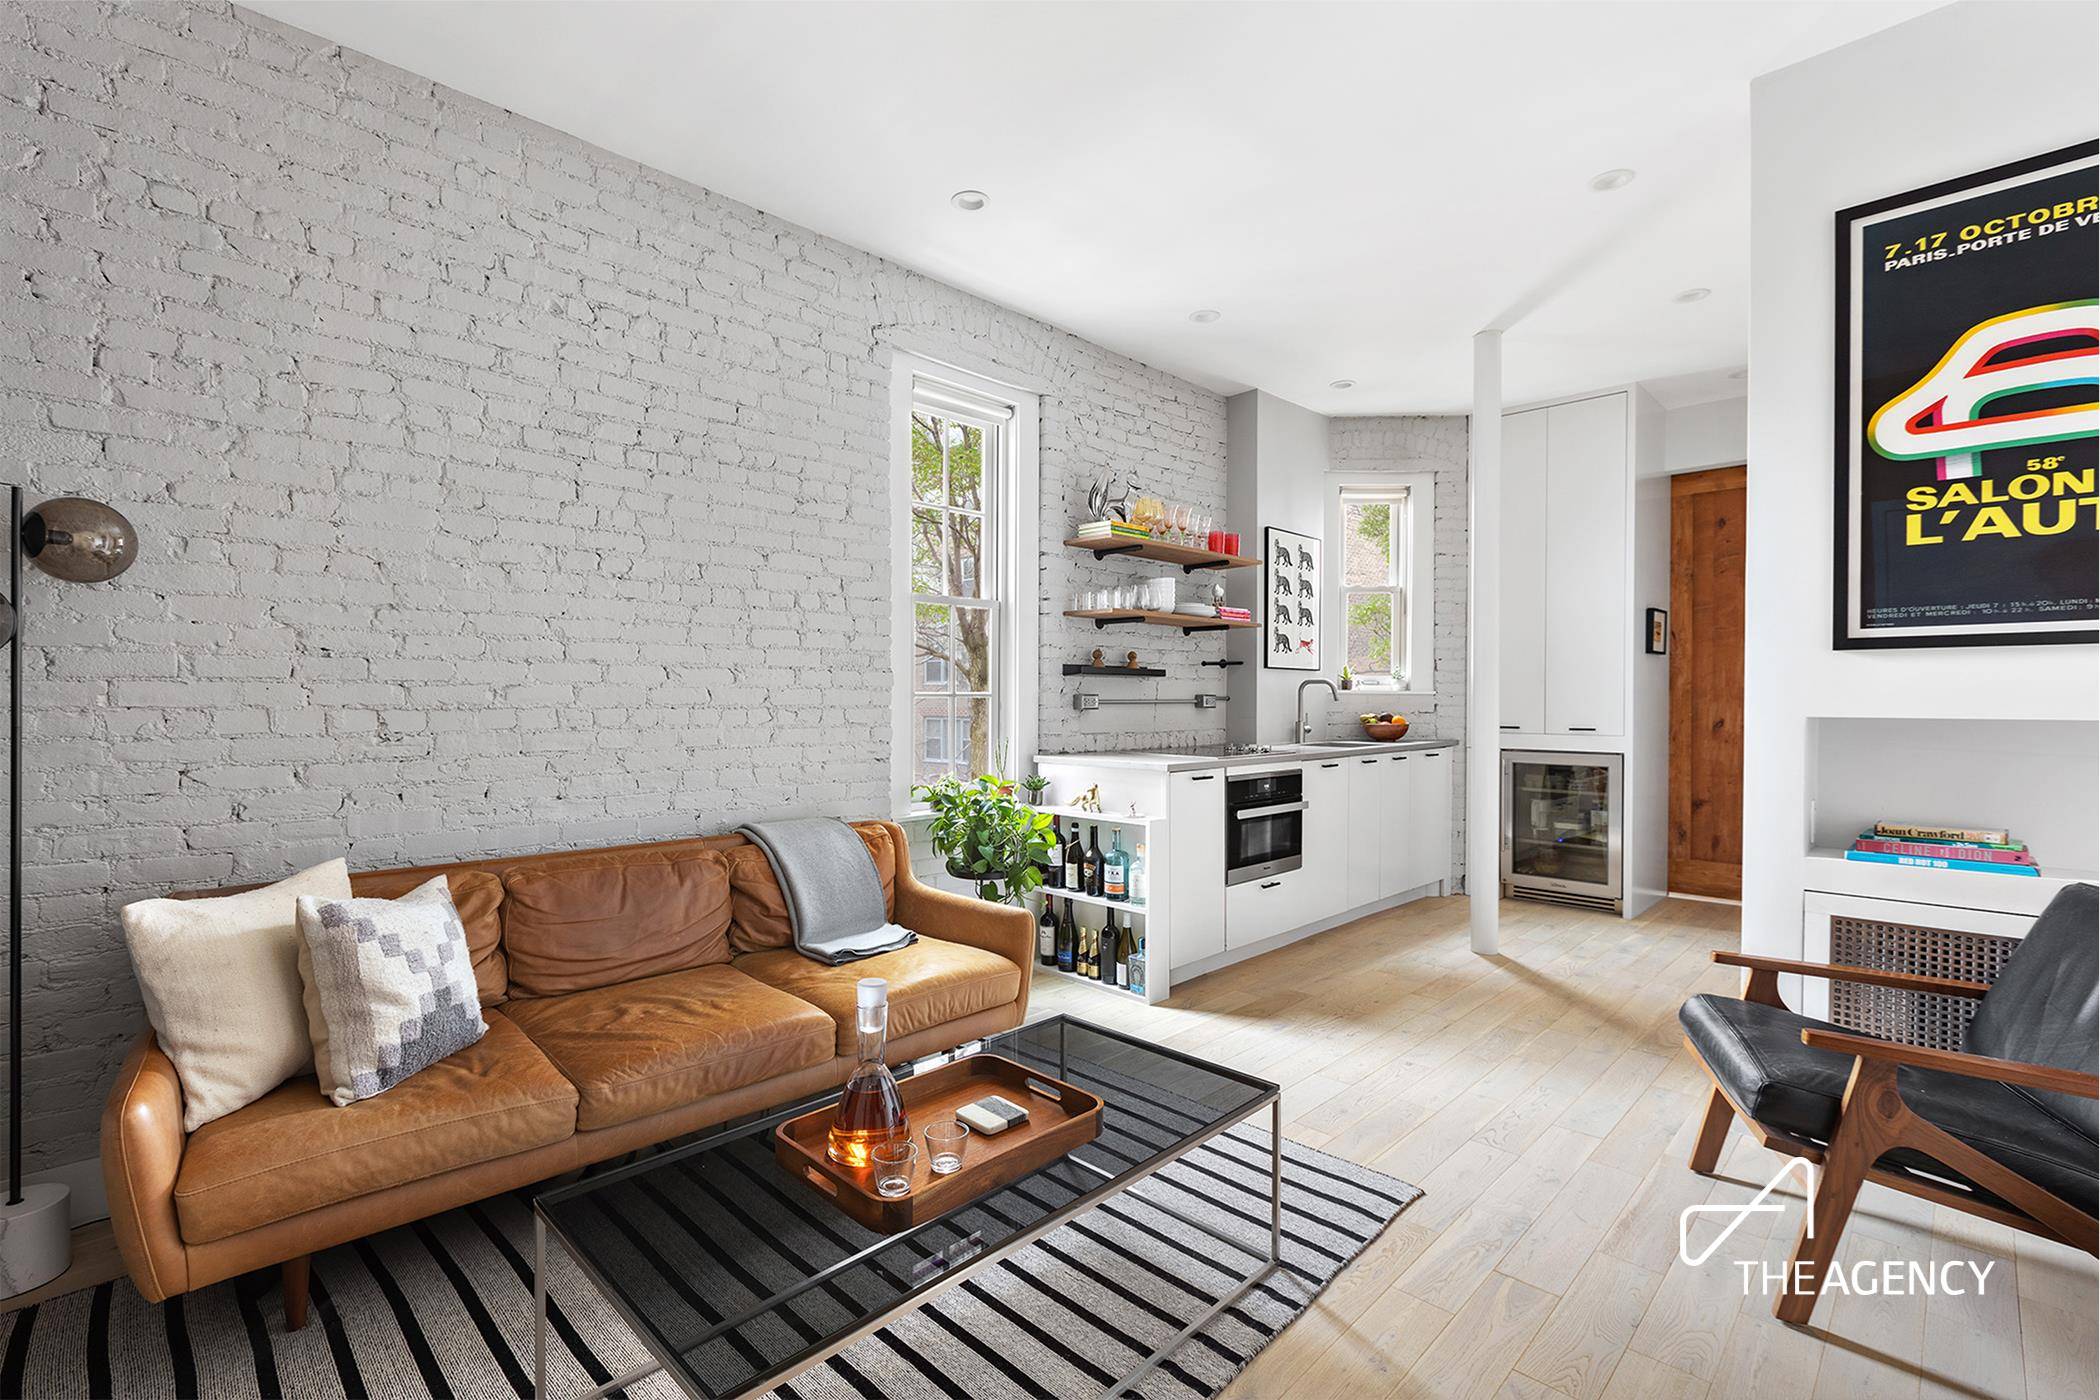 Welcome to 345 West 21st Street, nestled in the vibrant Chelsea neighborhood !